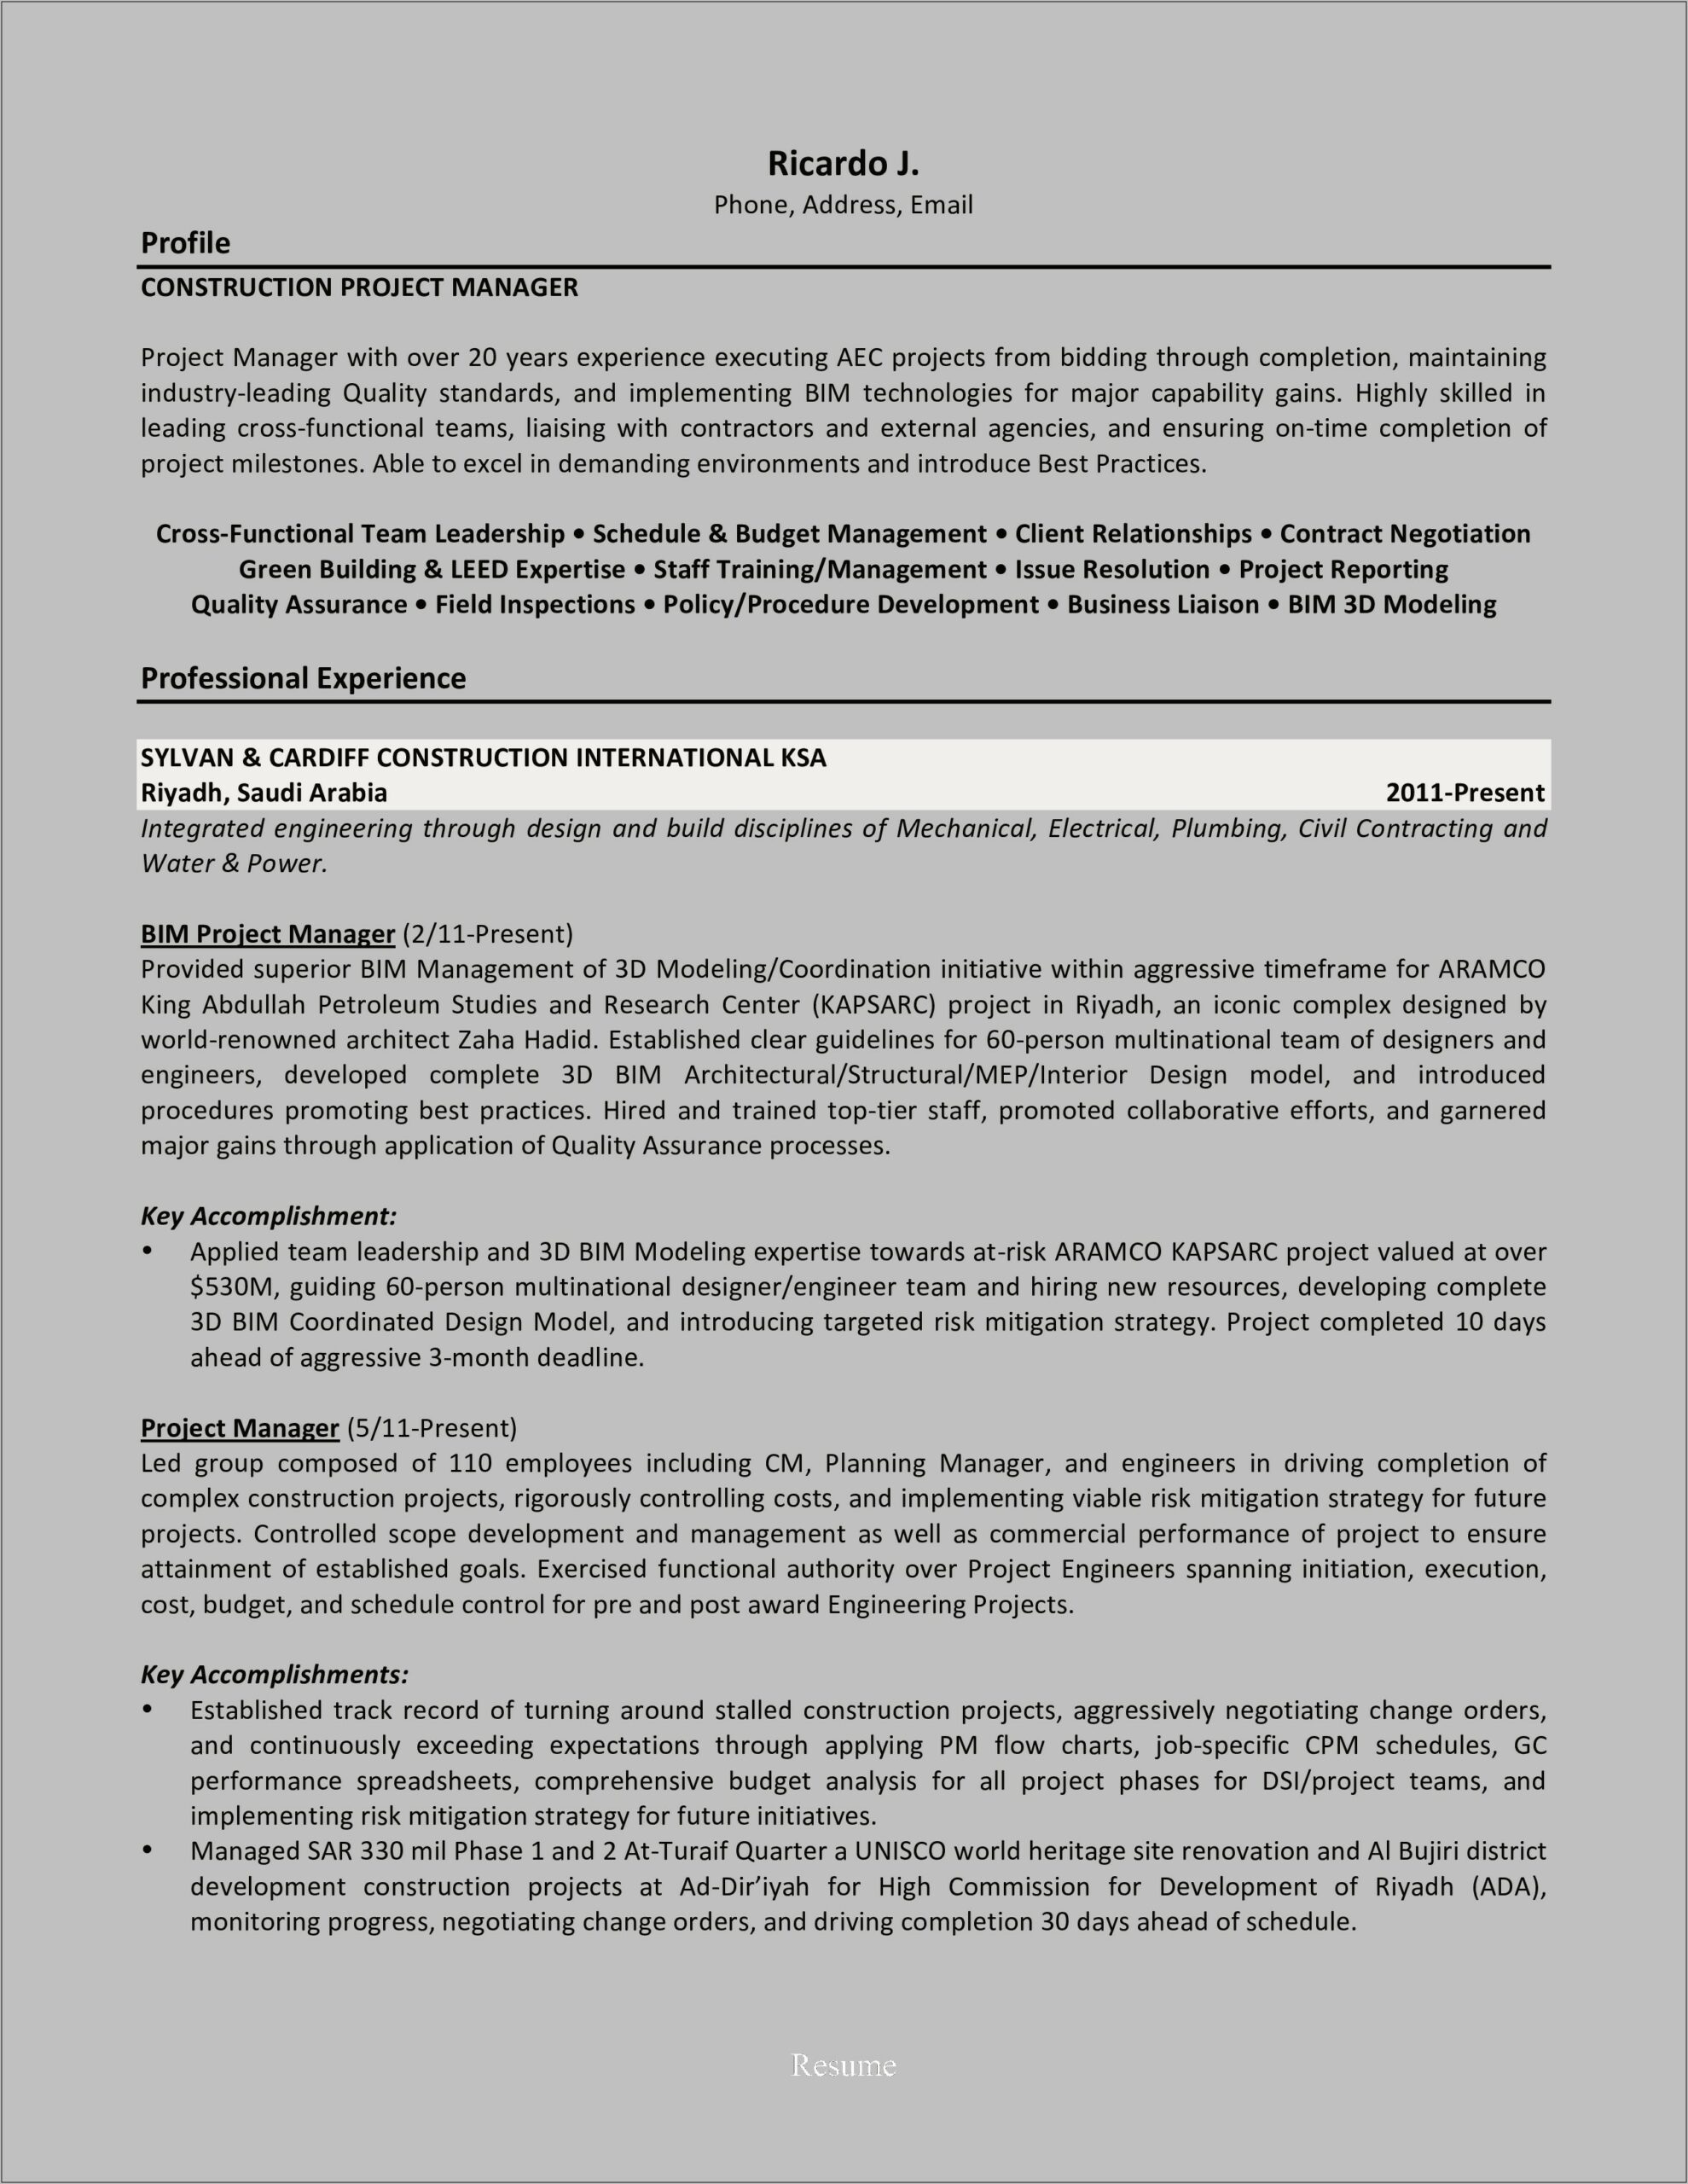 Construction Project Manager Job Resume Templates